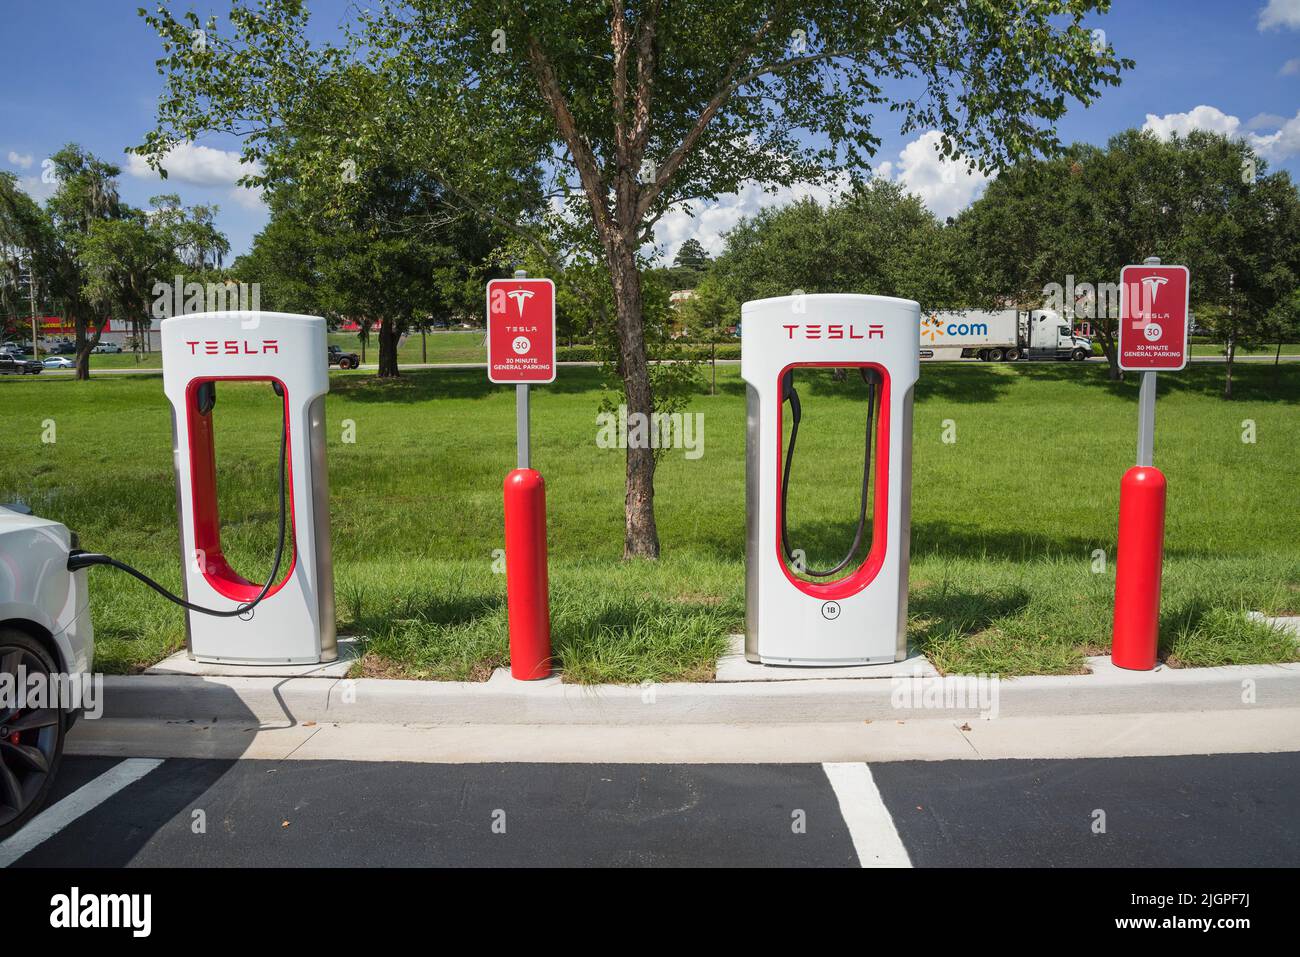 Electric car-vehicle charging station in the North Florida town of Alachua.  This is a small town located along Highway 441, near Gainesville. Stock Photo